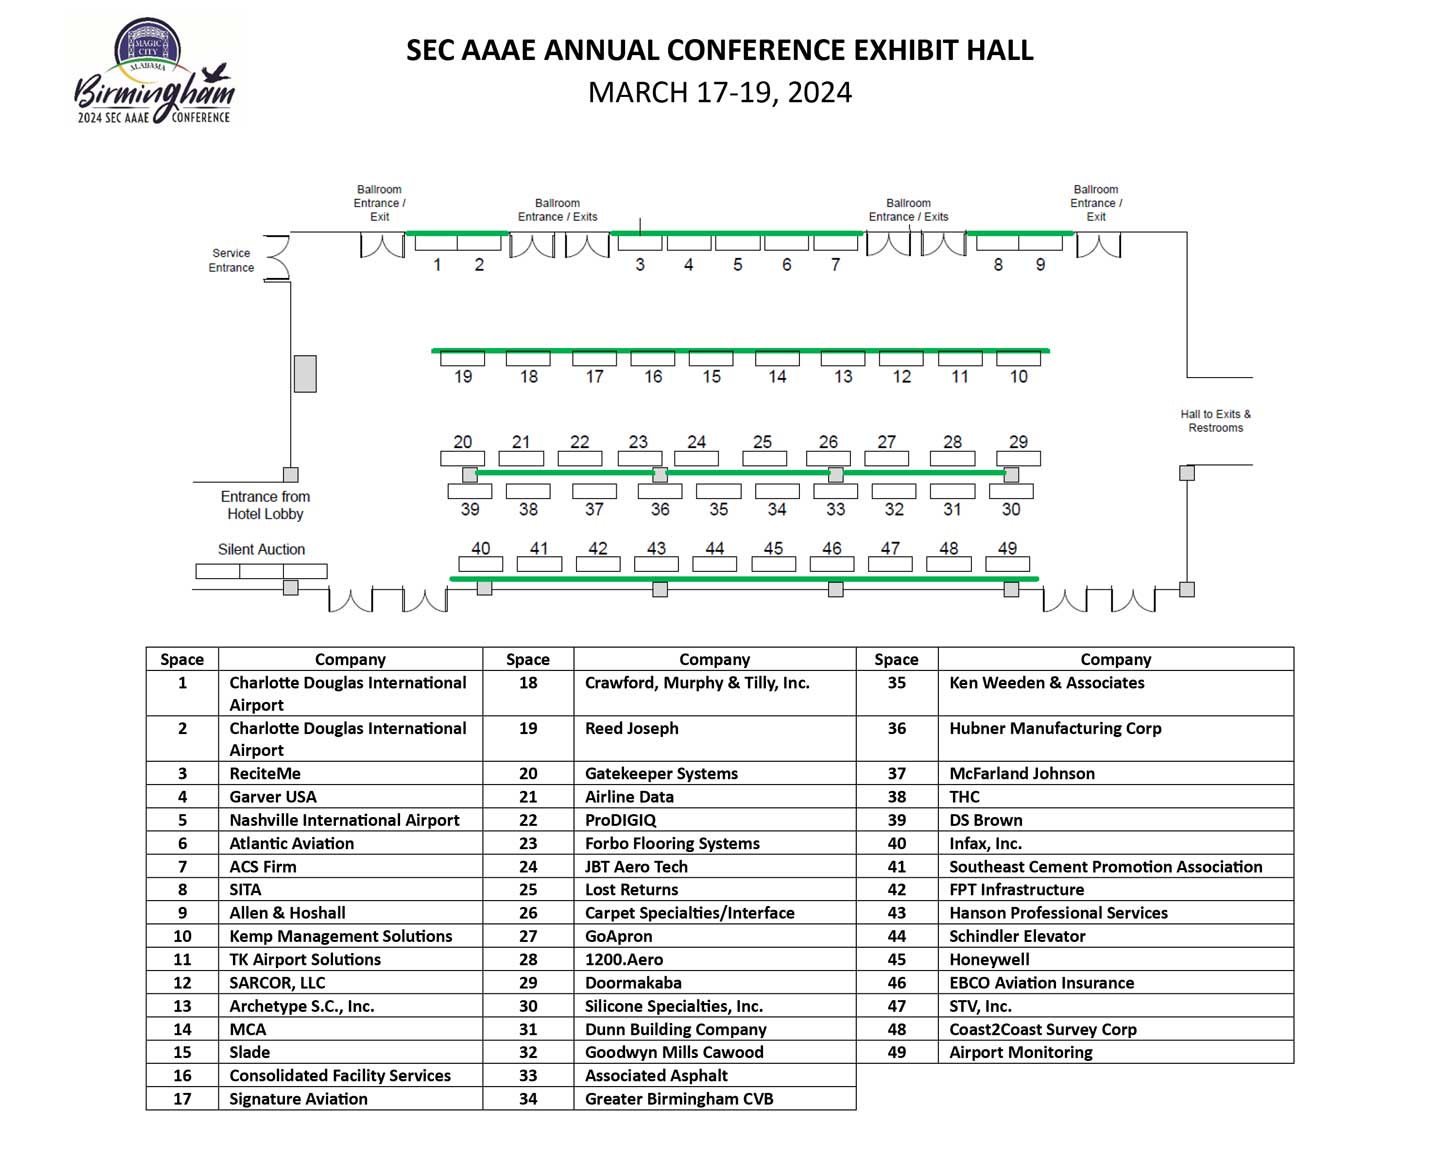 SEC-AAAE-ANNUAL-CONFERENCE-EXHIBIT-HALL---ASSIGNED-LOCATIONS-3-4-24-1